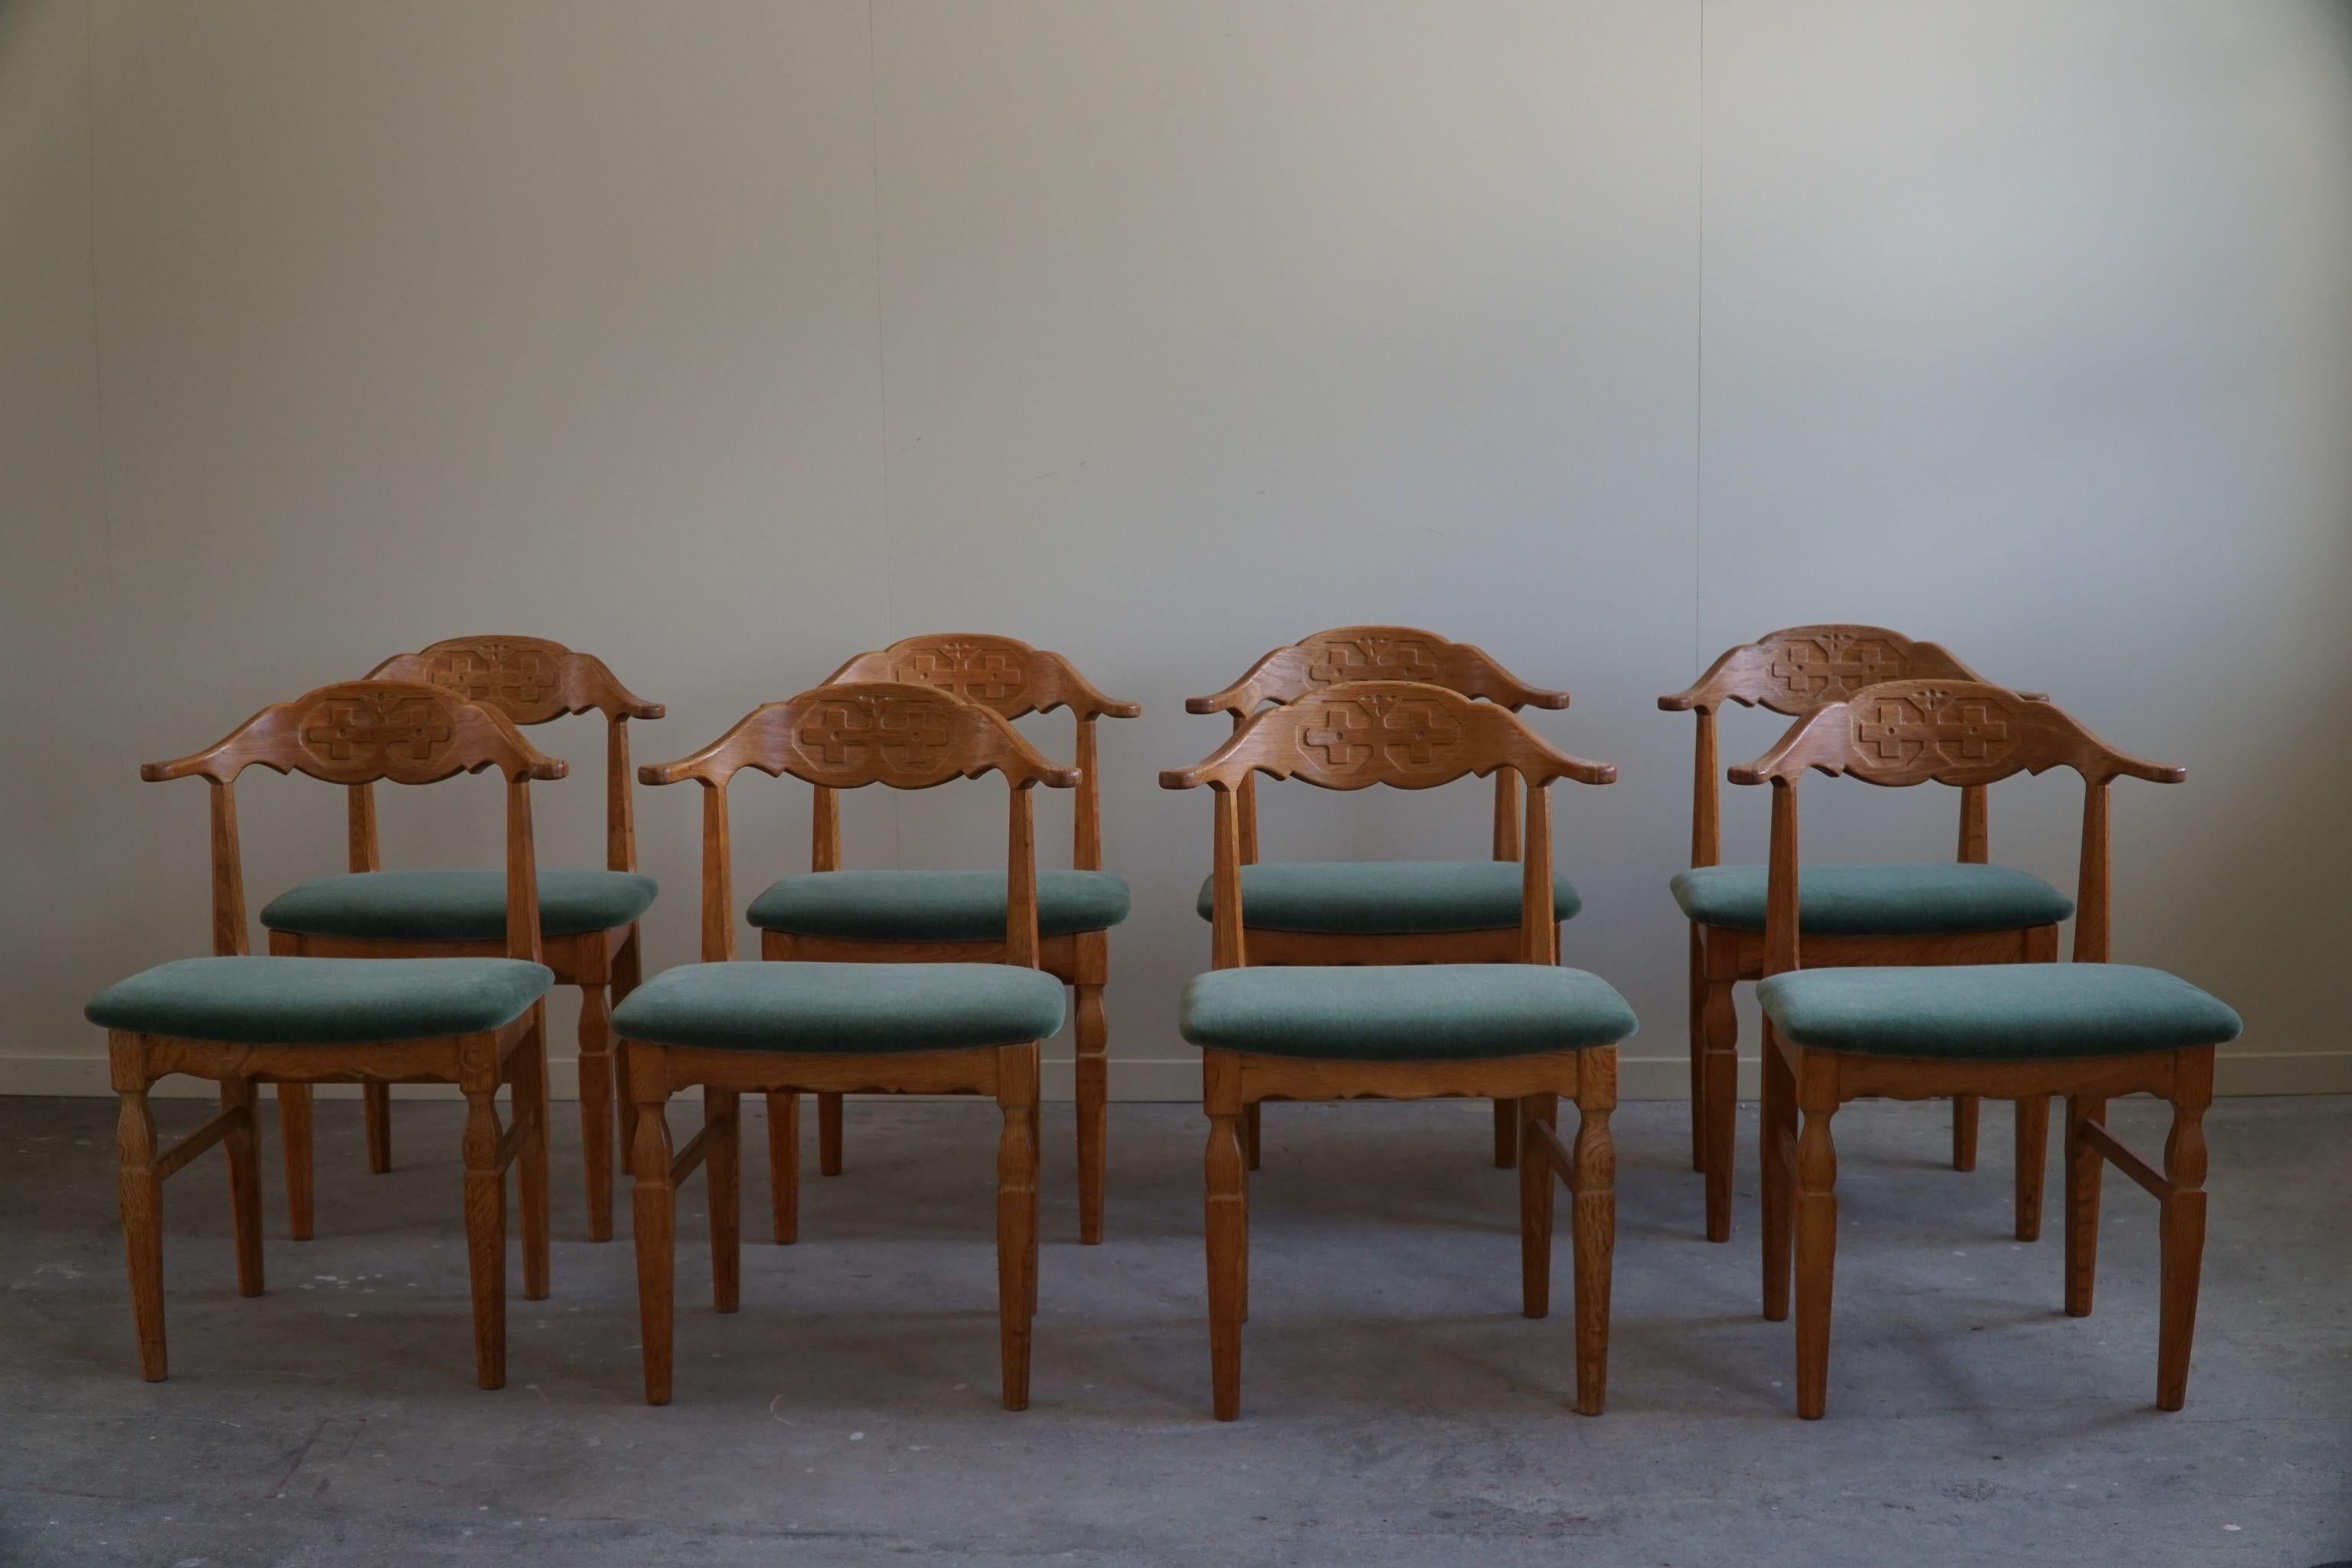 Such a magnificent set of 8 dining chairs in oak, seats reupholstered in great quality green mohair.
Designed by Henning Kjærnulf for E.G. Møbler - circa 1960s.

The overall impression of these mid century chairs are really good.
This set will